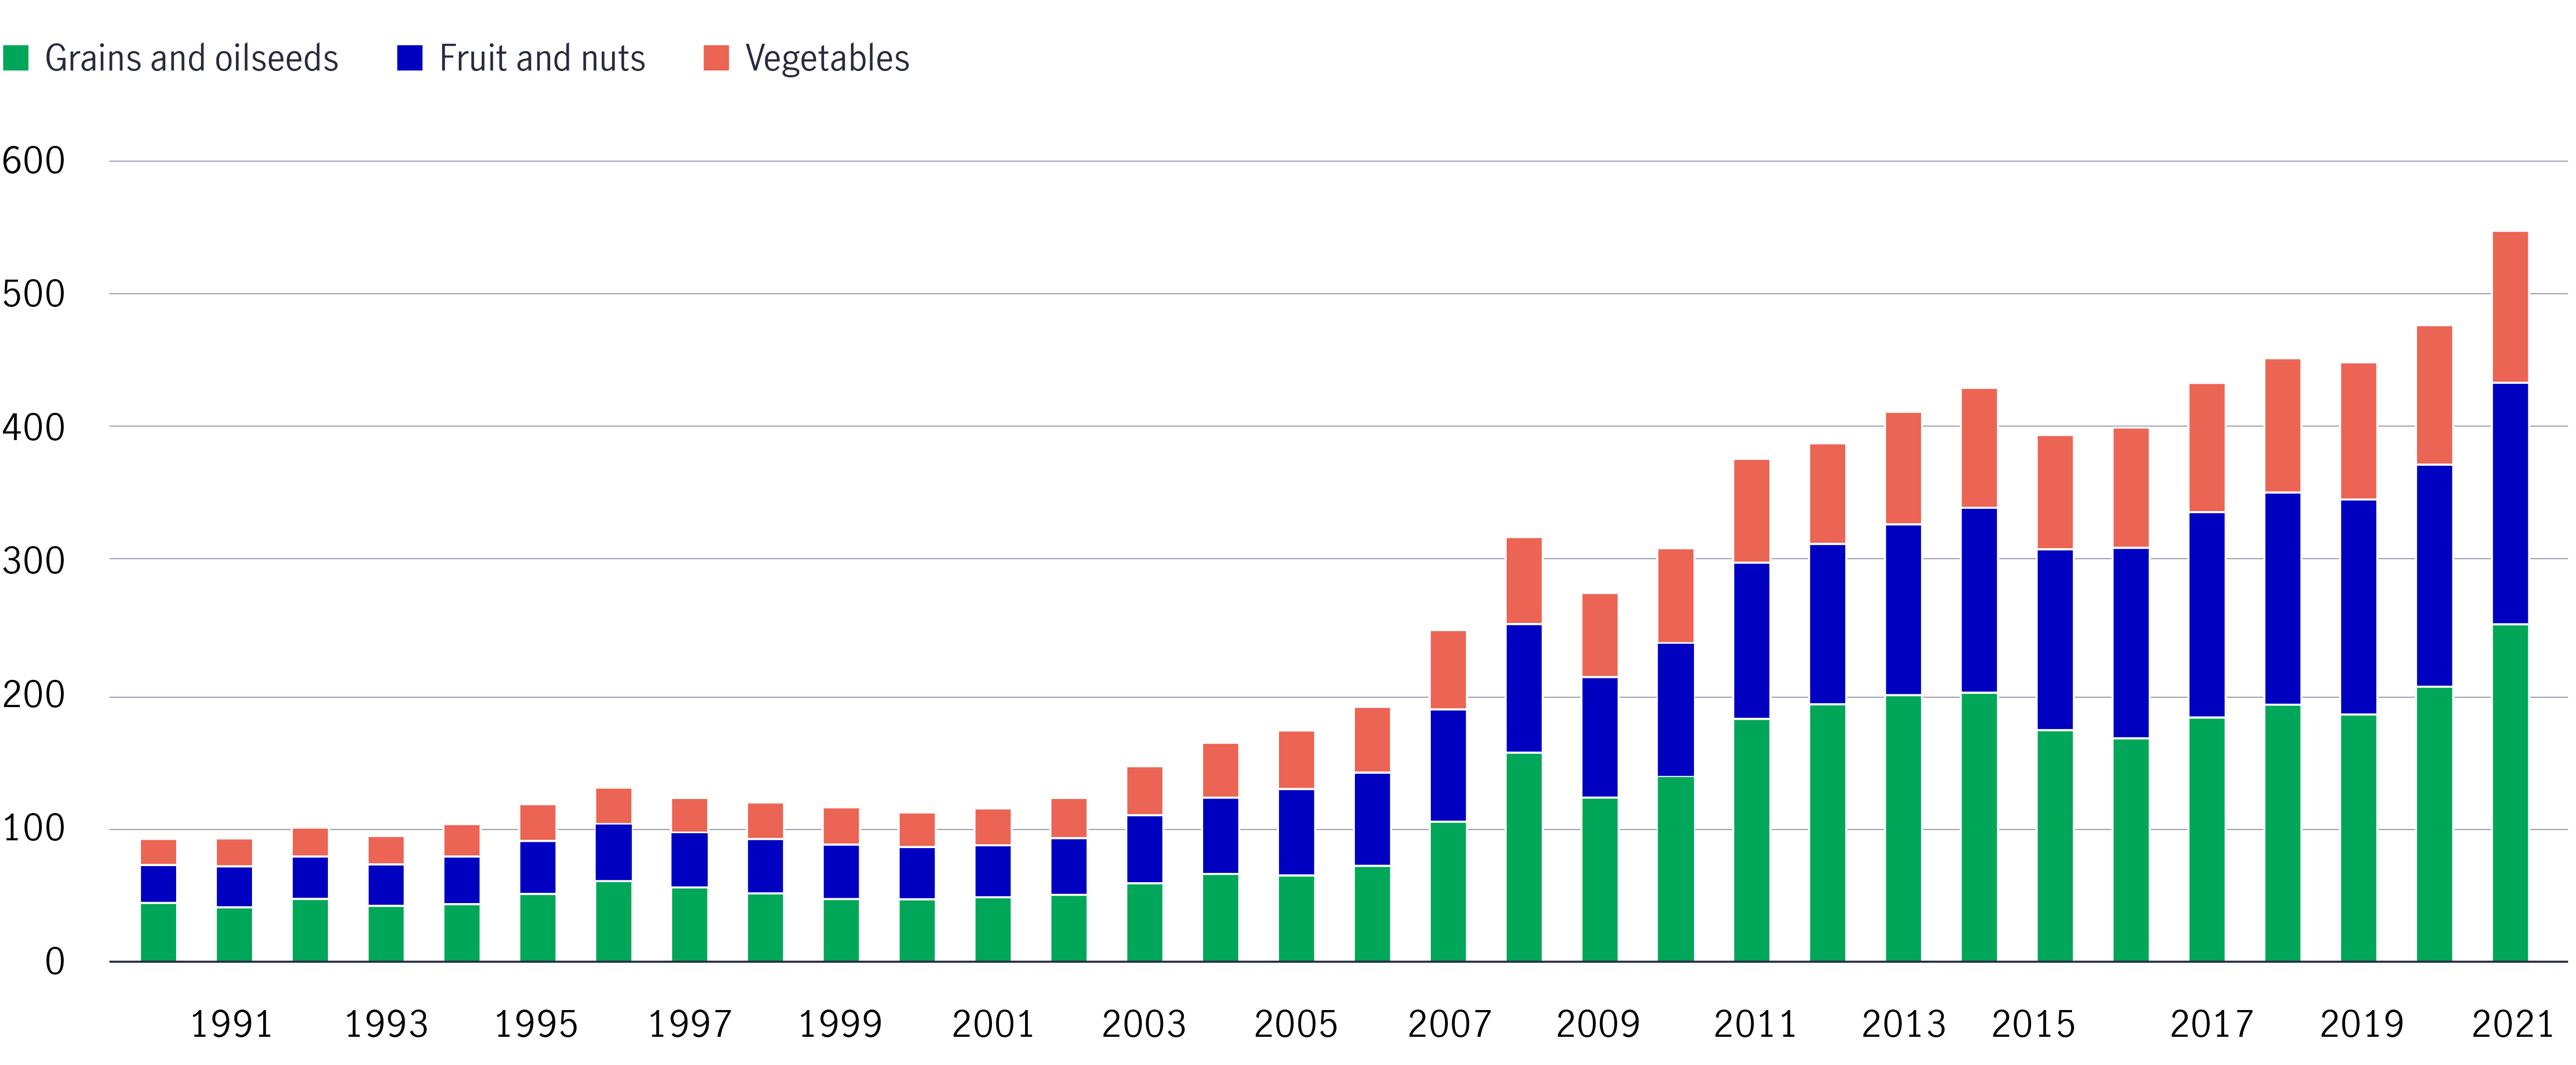 A bar chart displays the growth in global exports of grains and oilseeds, fruit and nuts, and vegetables between 1991 to 2021.